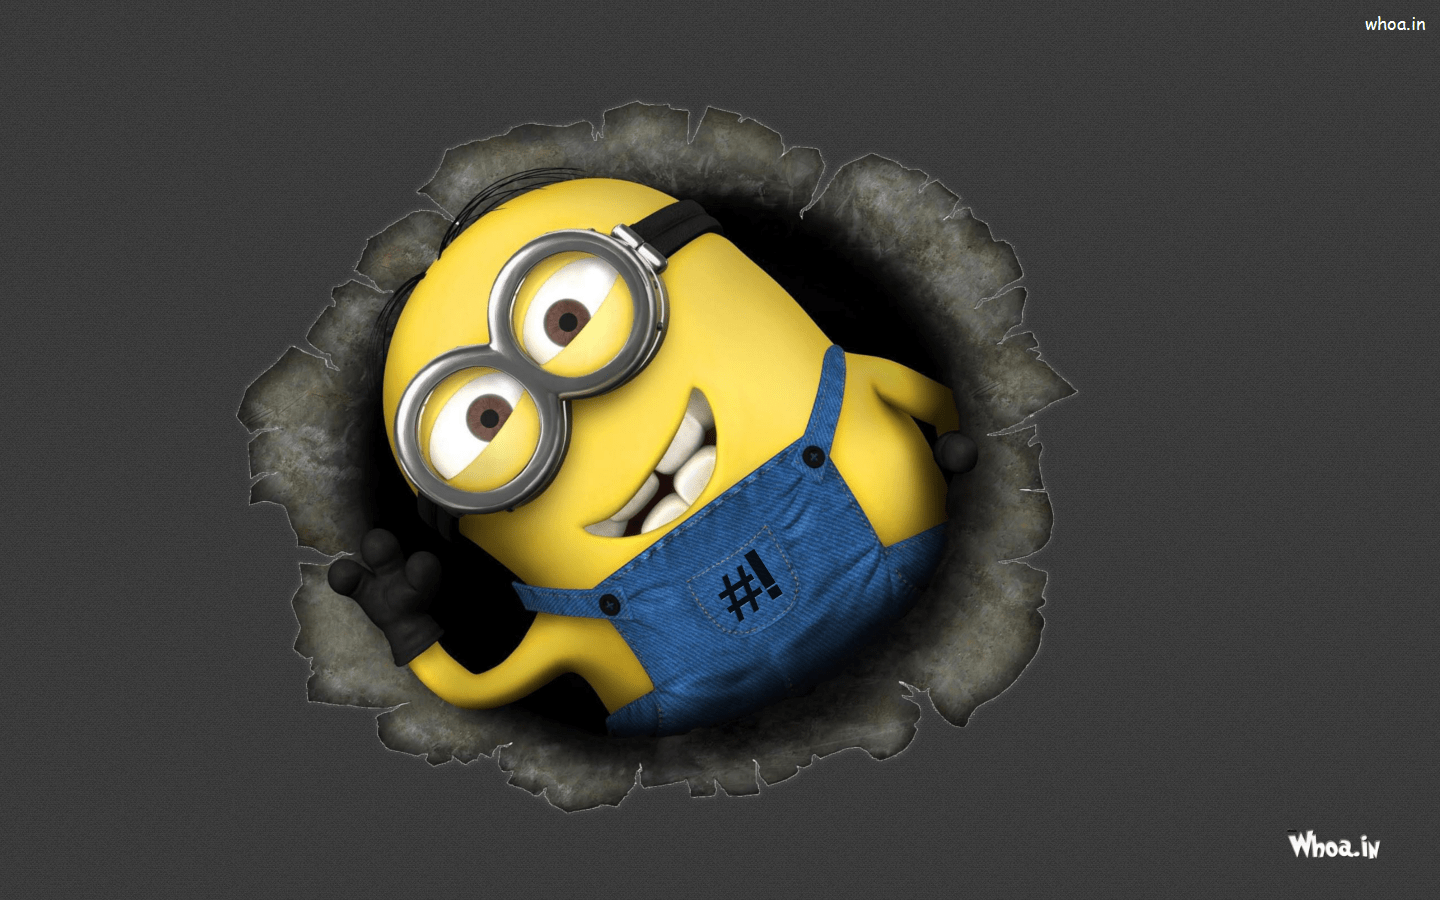 Cute Minions wallpaper for wall – Myindianthings